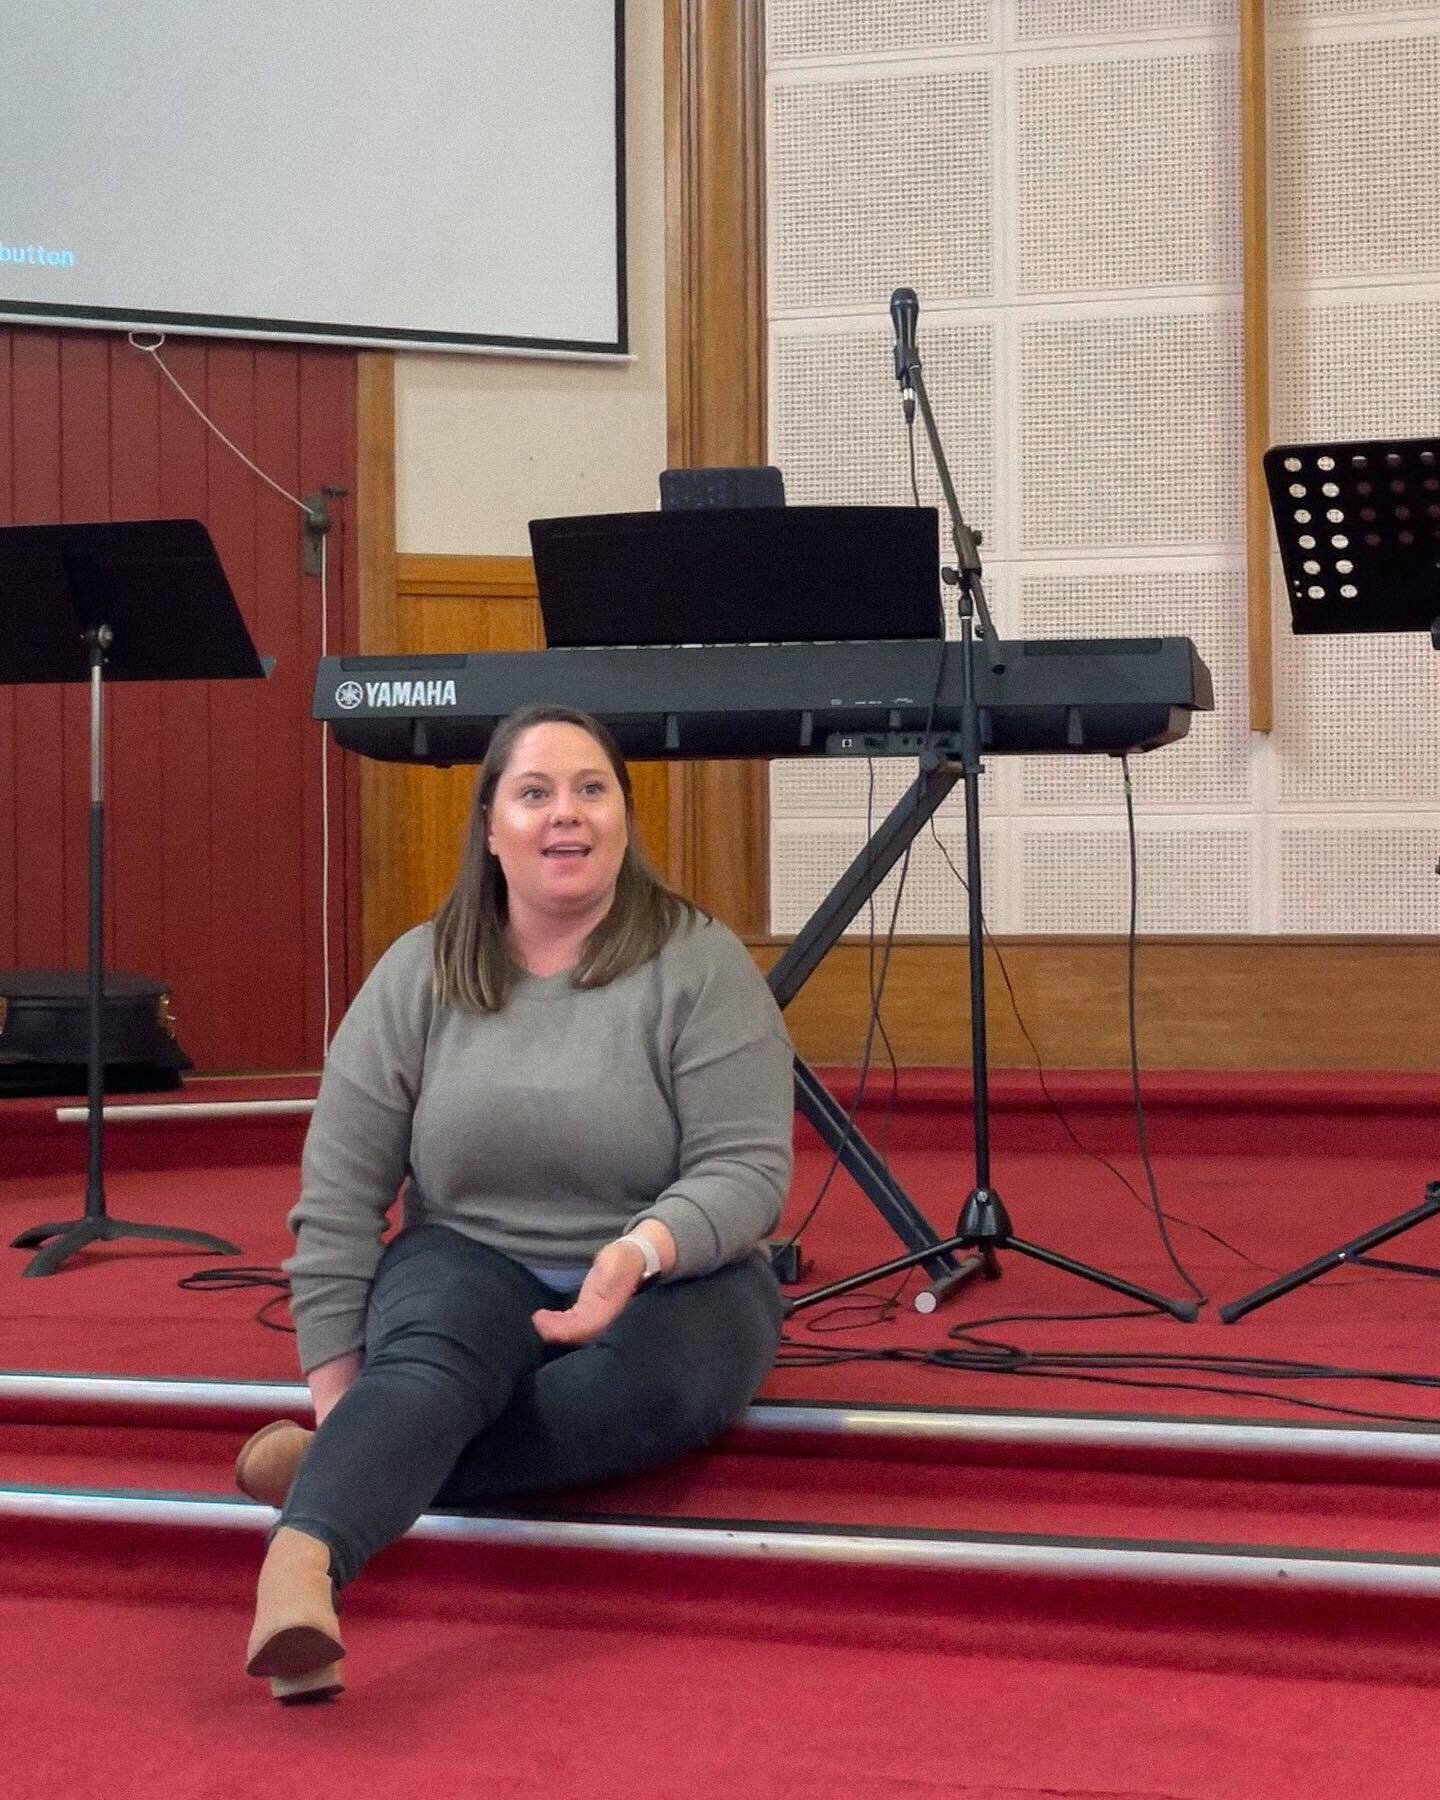 On Sunday afternoon Christy shared with us about honesty in our relationship with God! He&rsquo;s close, and doesn&rsquo;t need to feel like a big scary thing. He loves us and always has time for us! 😄